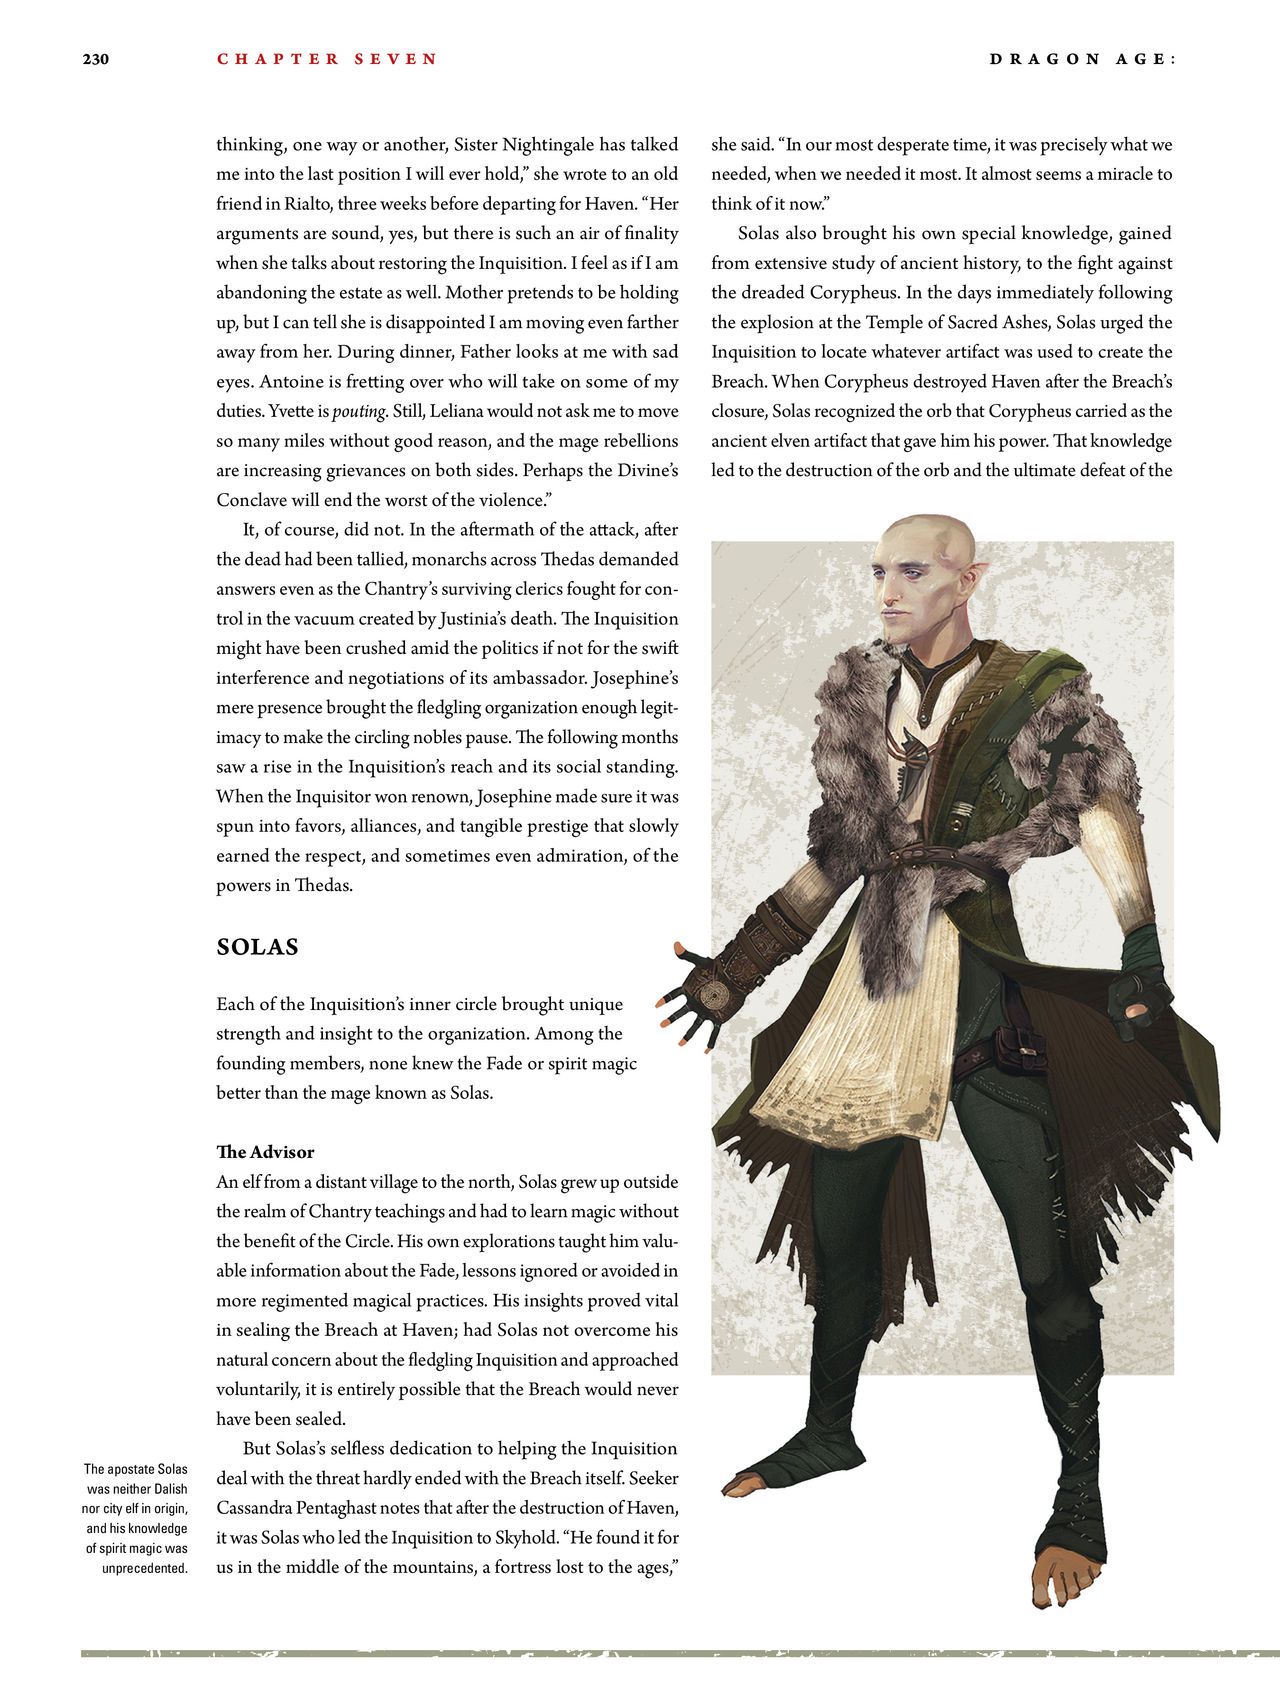 Dragon Age - The World of Thedas v02 225